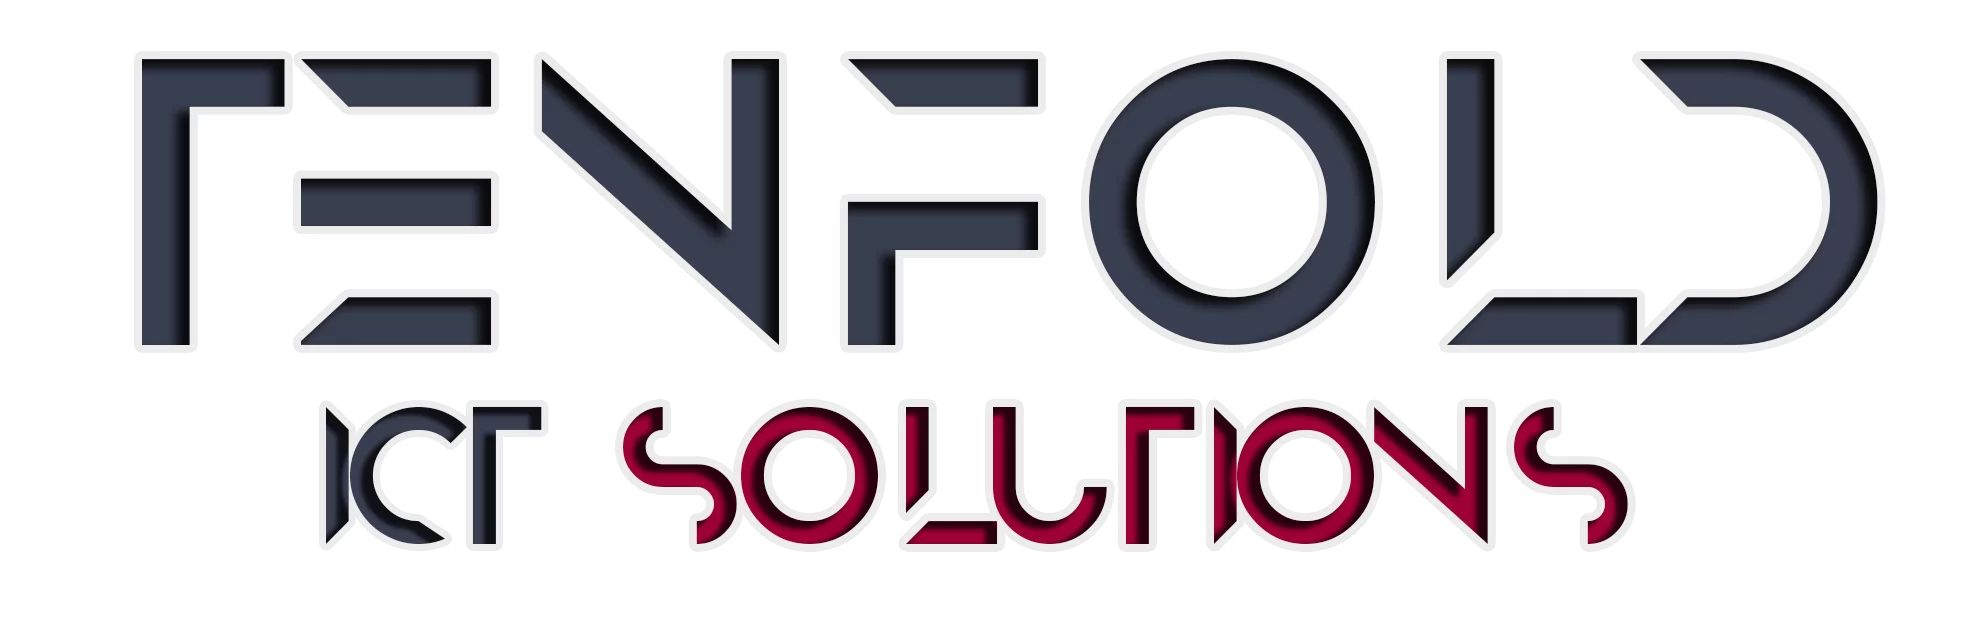 Tenfold ICT Solutions